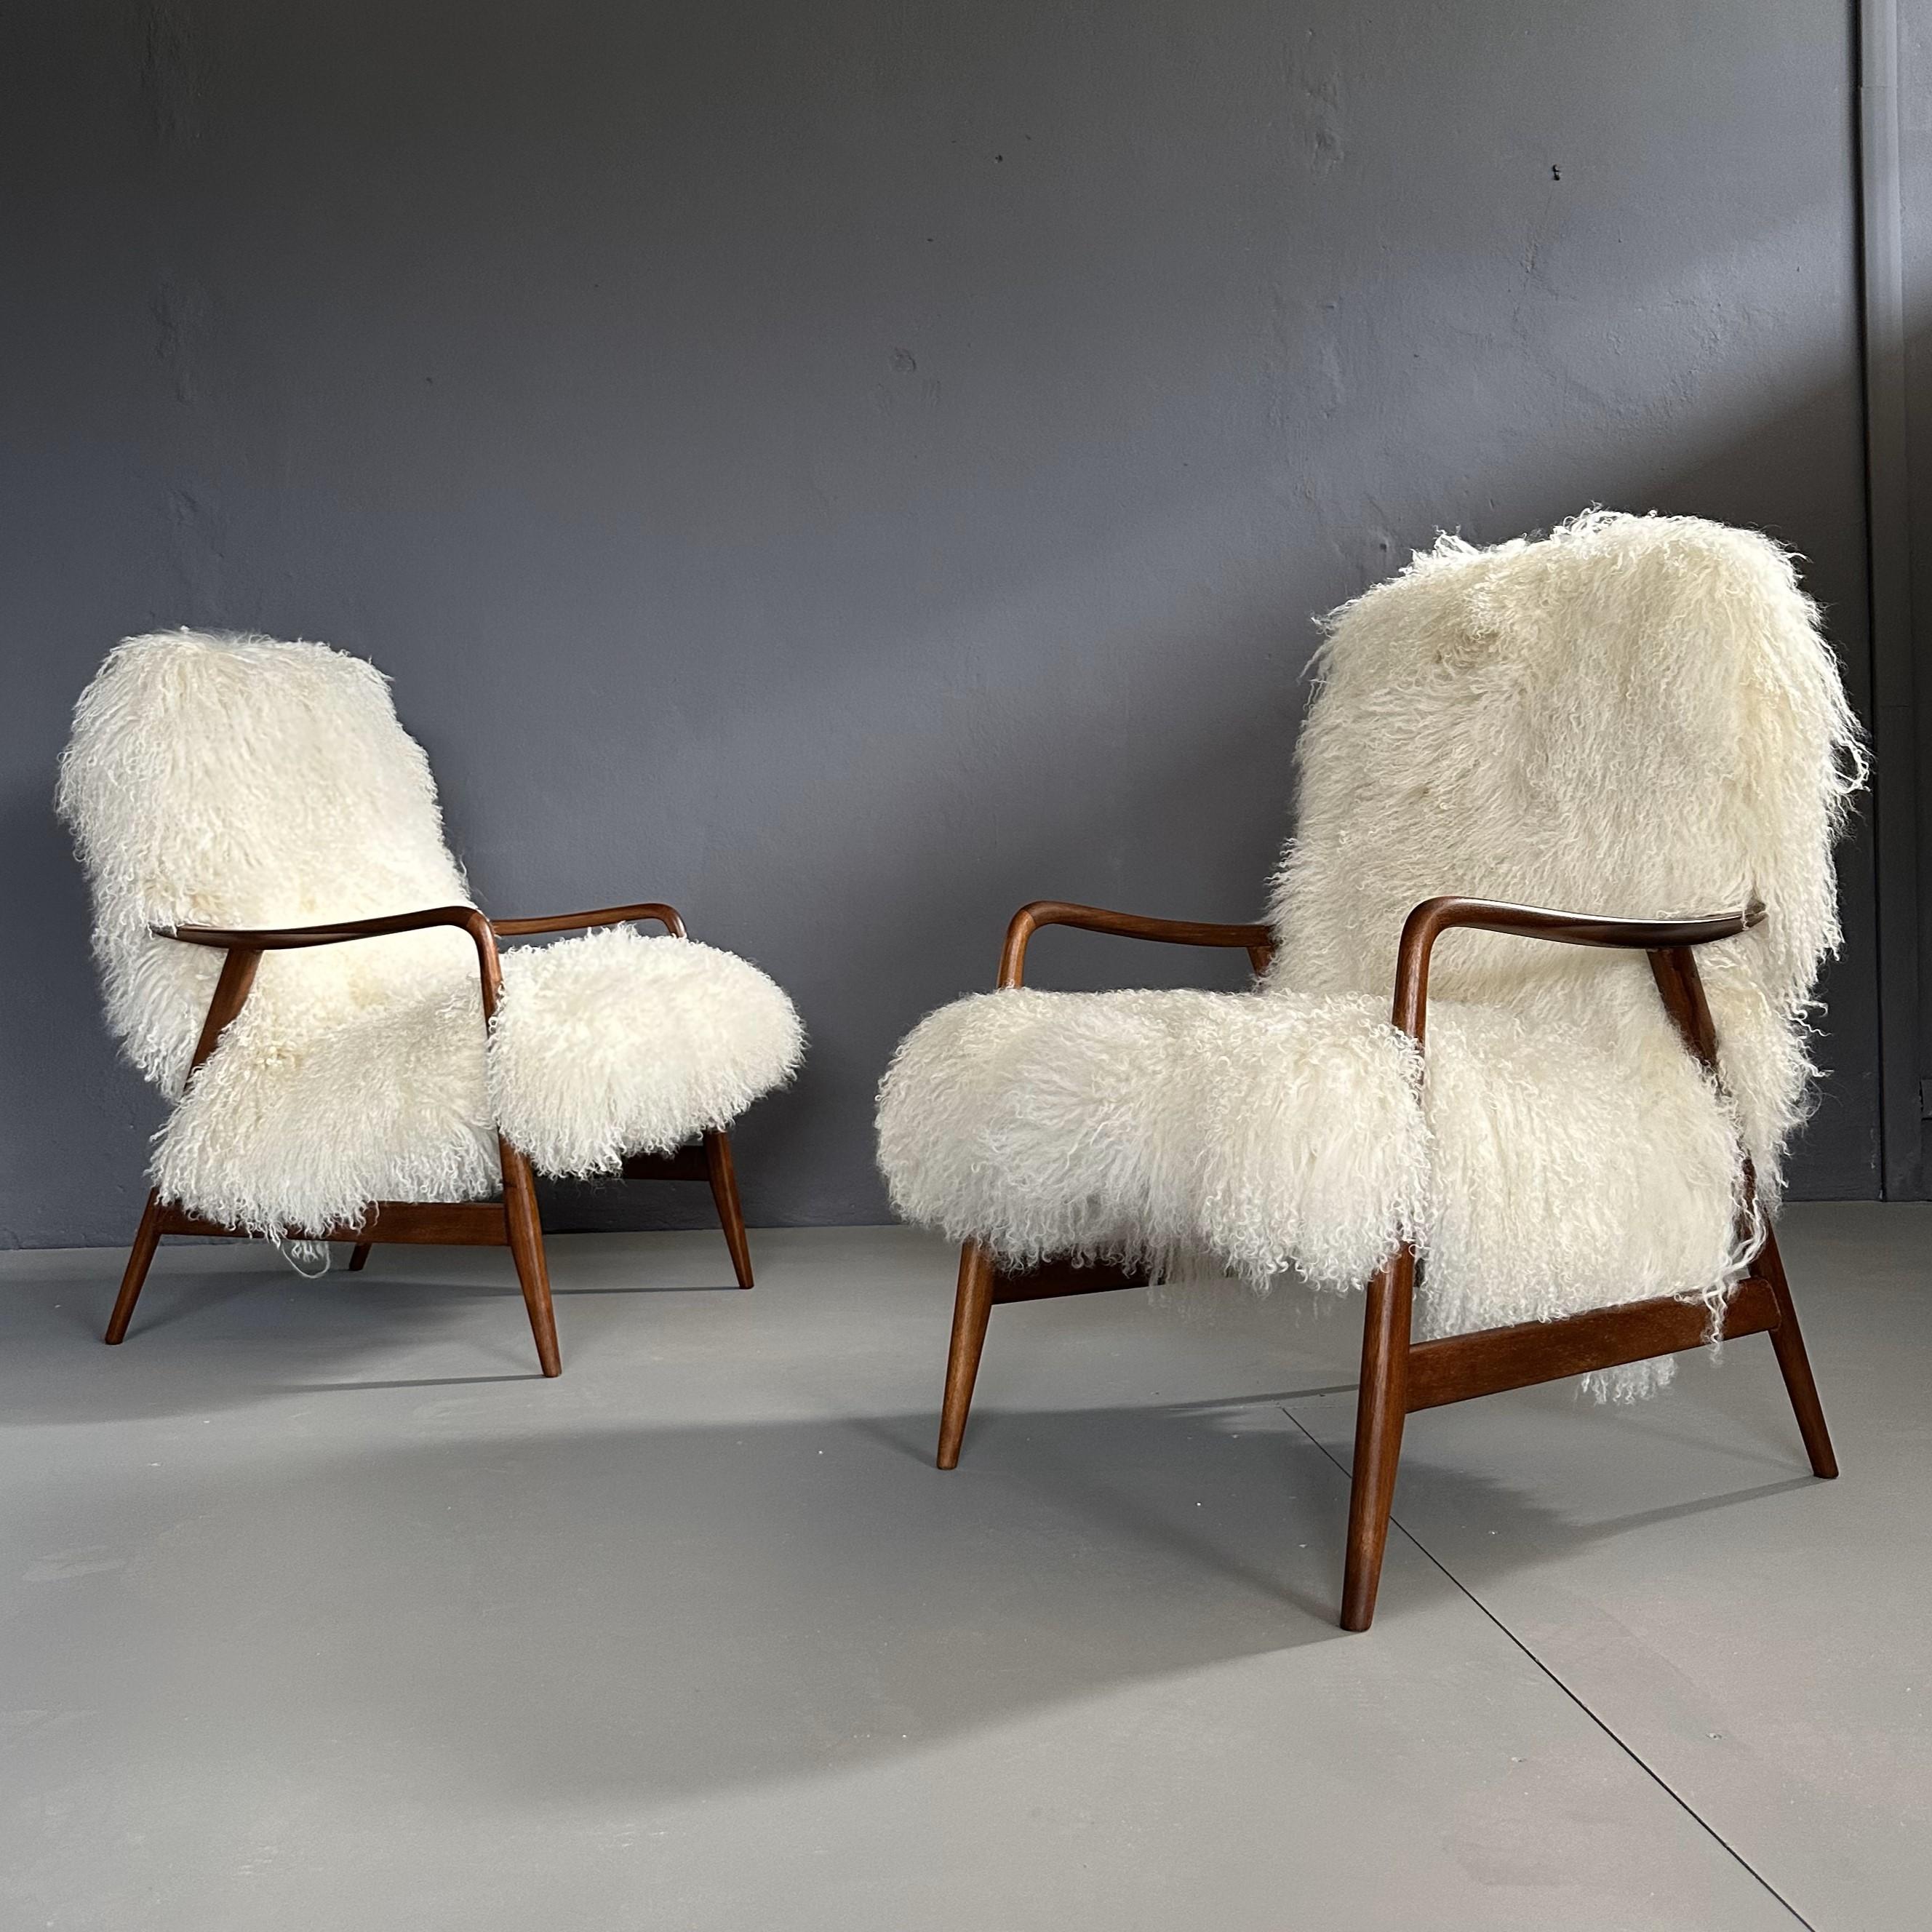 Set of 2 1950s Danish armchairs by Alf Svensson for Dux, teak and goat hair 
Danish armchairs created by the designer Alf Svensson and produced by Dux of Sweden in the 1950s.
The structure of the teak armchair with elegant typical Swedish